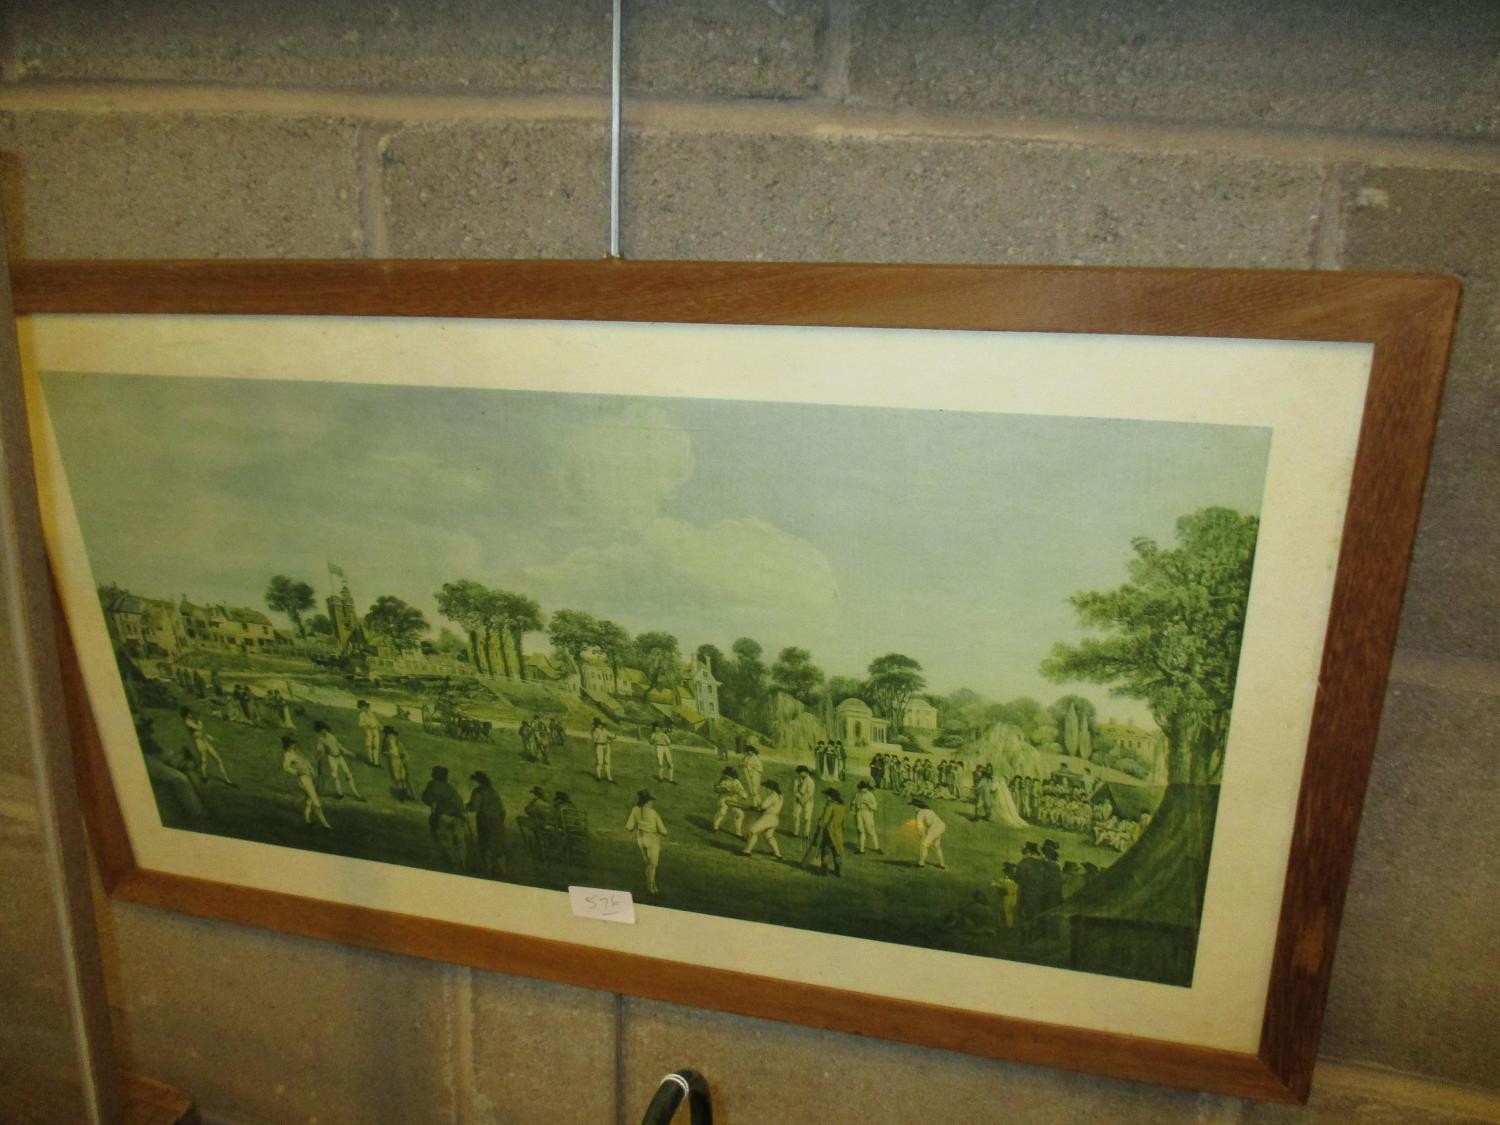 Waldock 1956 Landscape Watercolour, along with a Cricket Print - Image 2 of 2